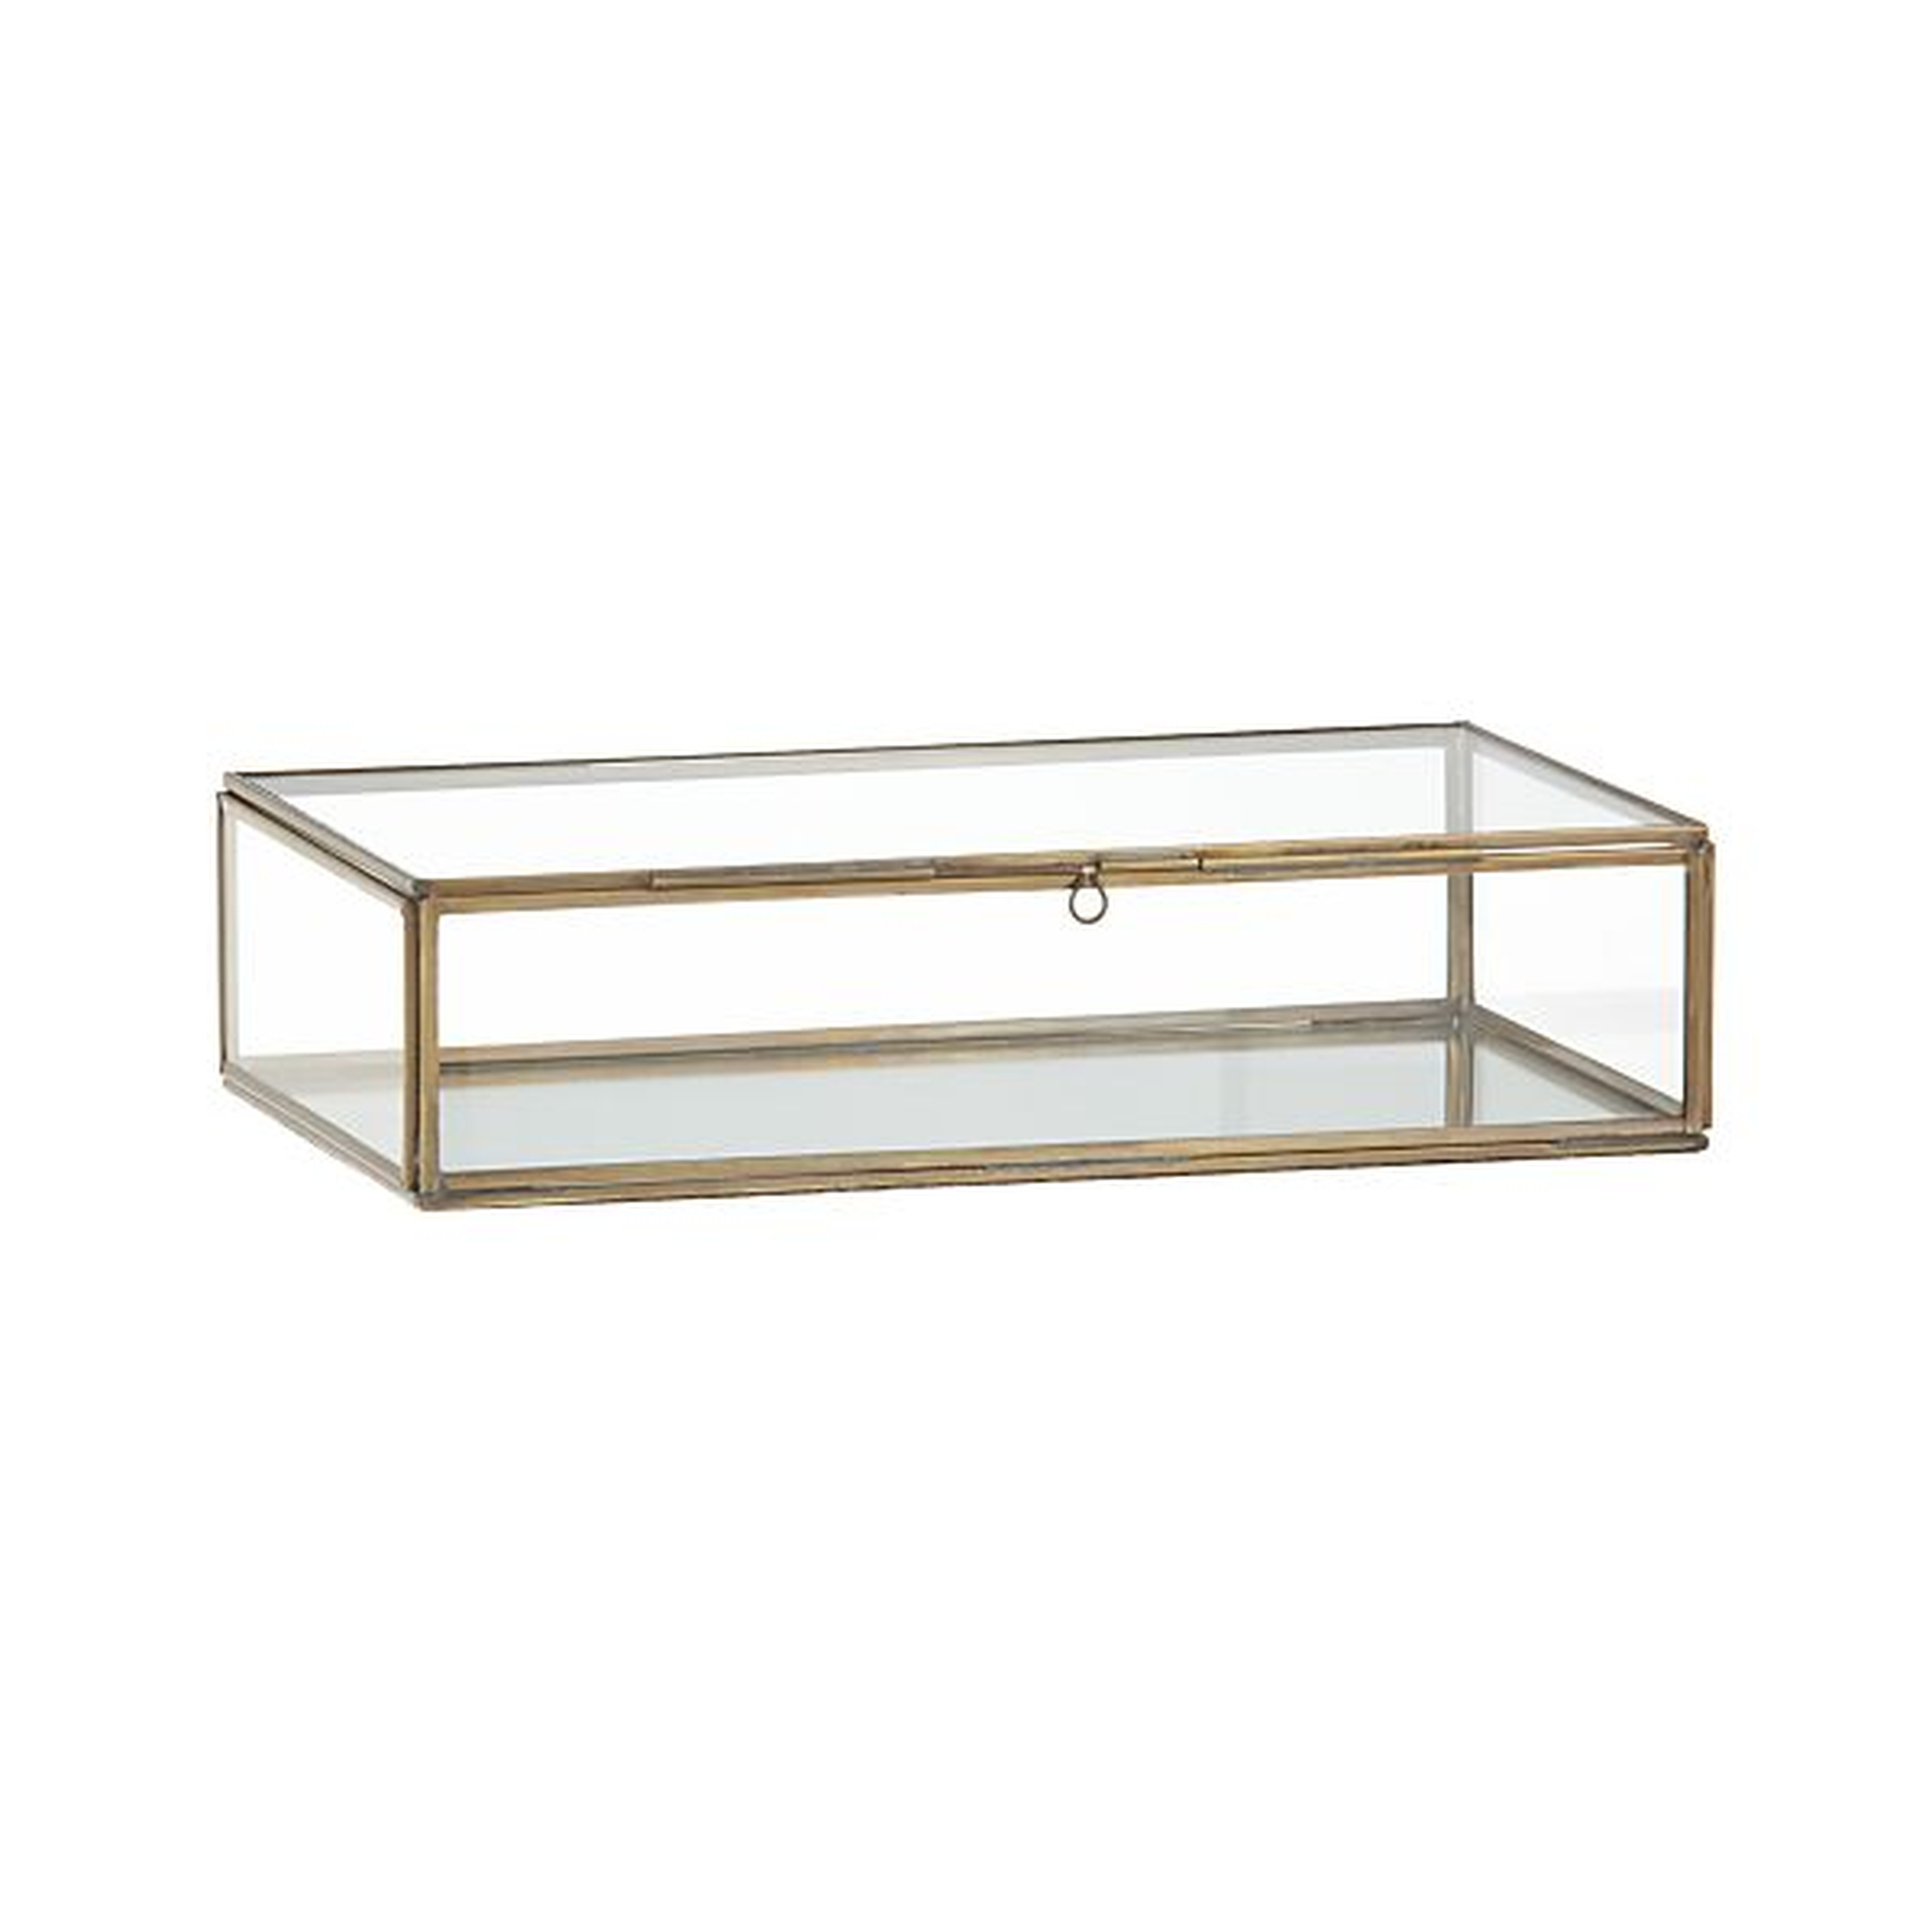 Clarus Small Brass Display Box - Crate and Barrel